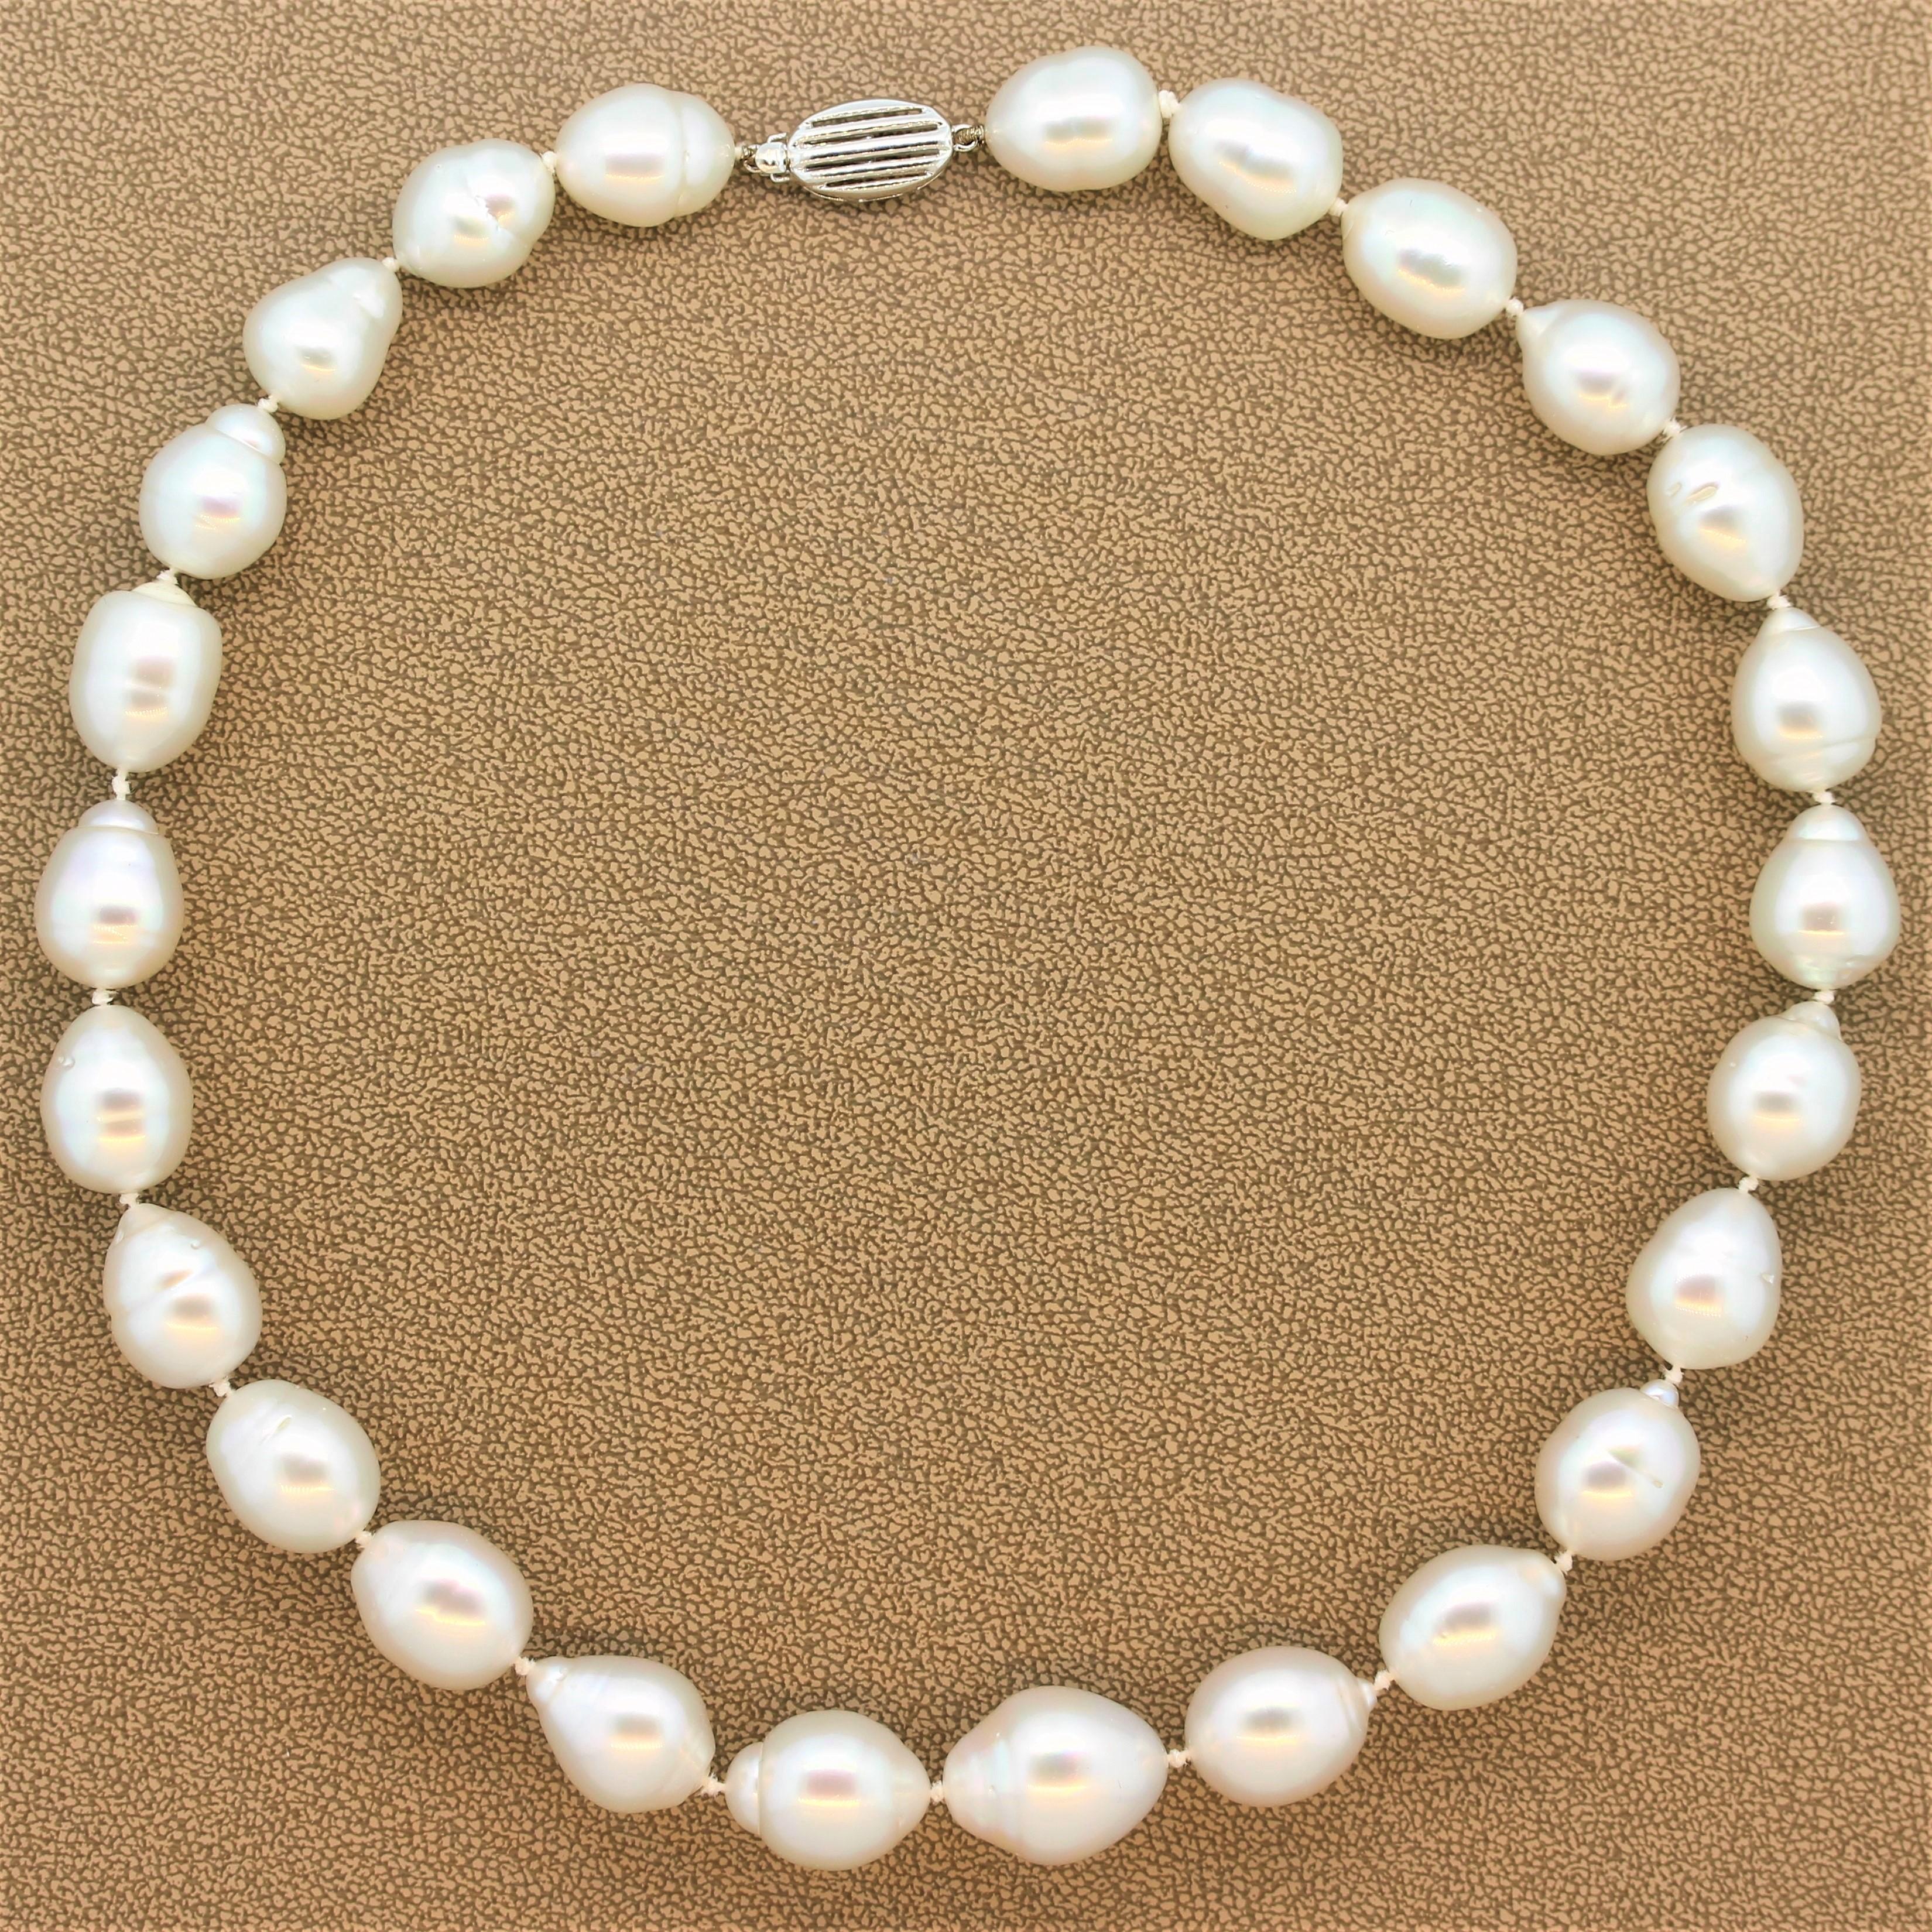 This single strand necklace features distinct atypical lustrous baroque pearls. The graduating pearls vary in size from 14.99mm-12.00mm. The iridescent pearl necklace has a secure 14K white gold lock.

Necklace Length: 18.00 inches
